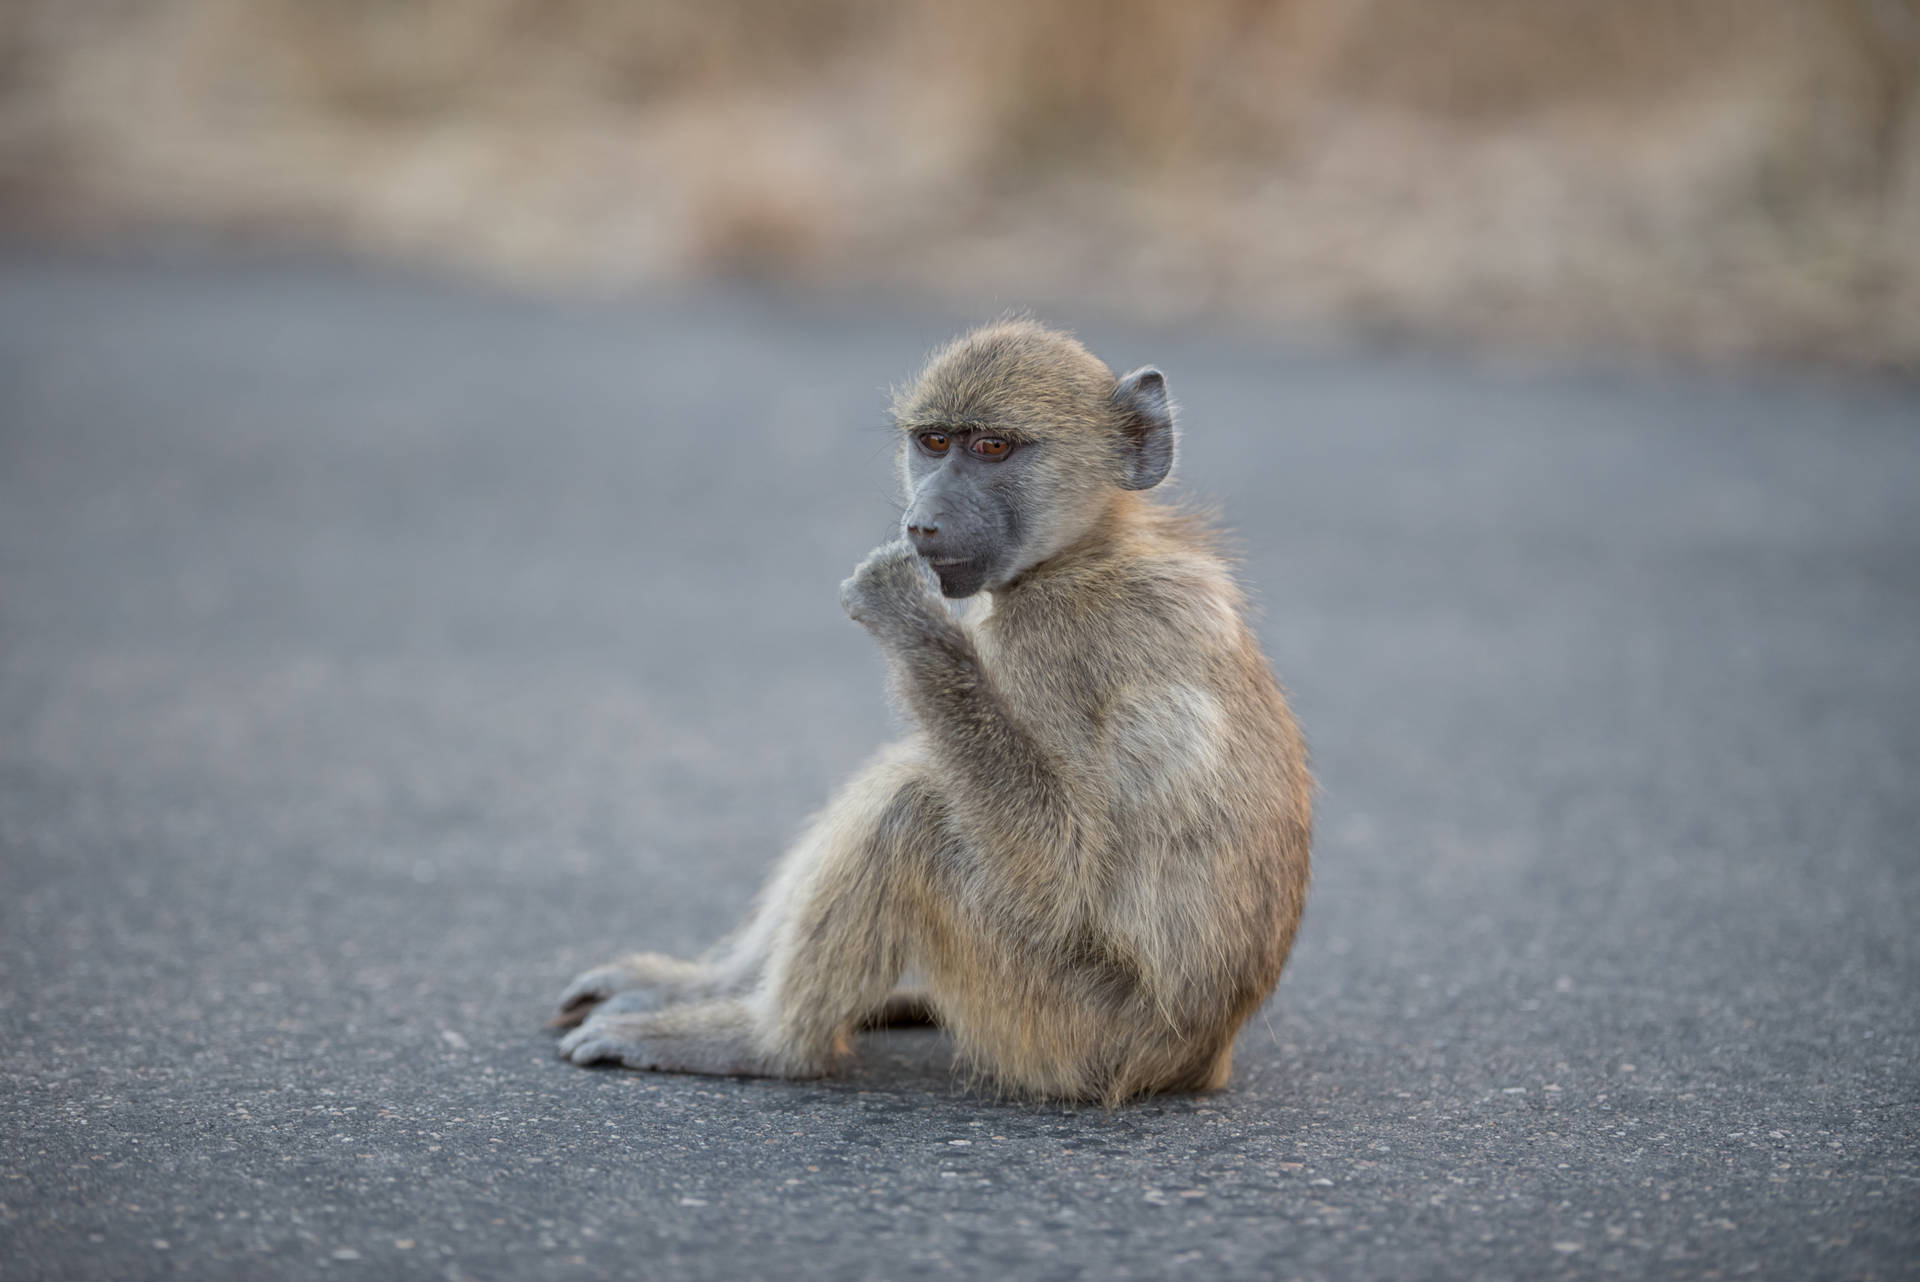 Baby Monkey On The Road Background